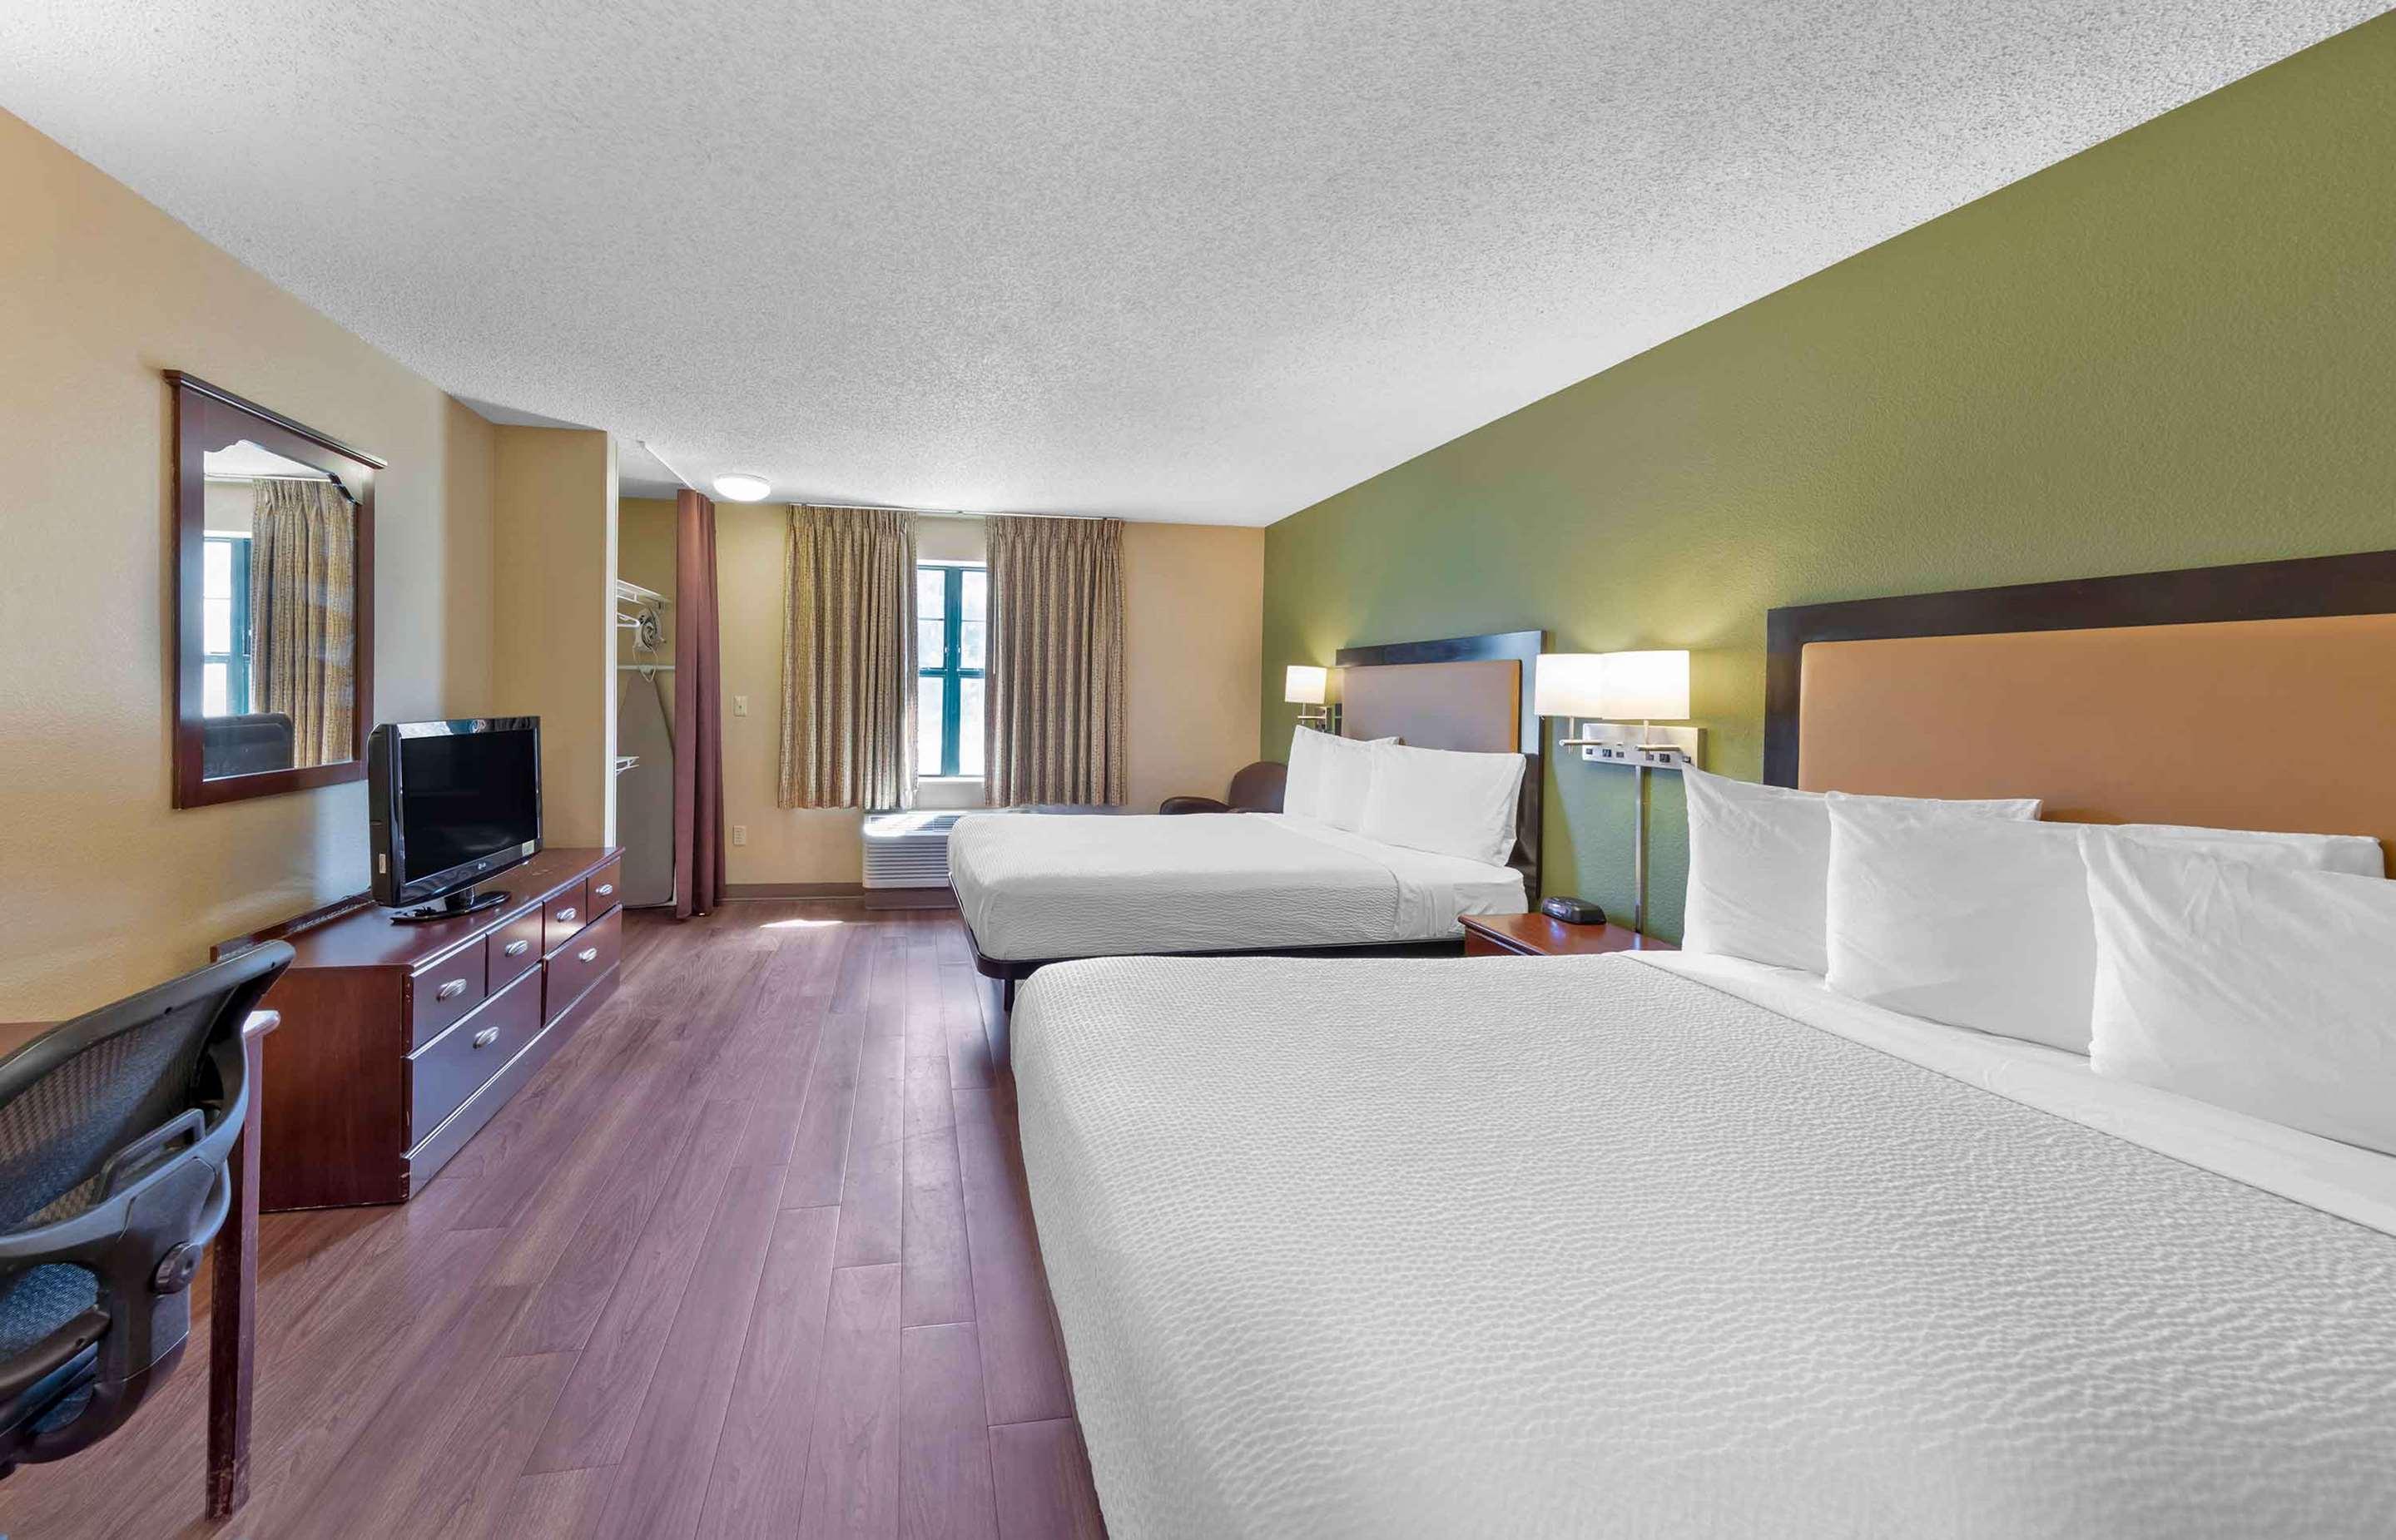 Comfort Inn & Suites Bothell - I-405, Exit 26, WA - See Discounts